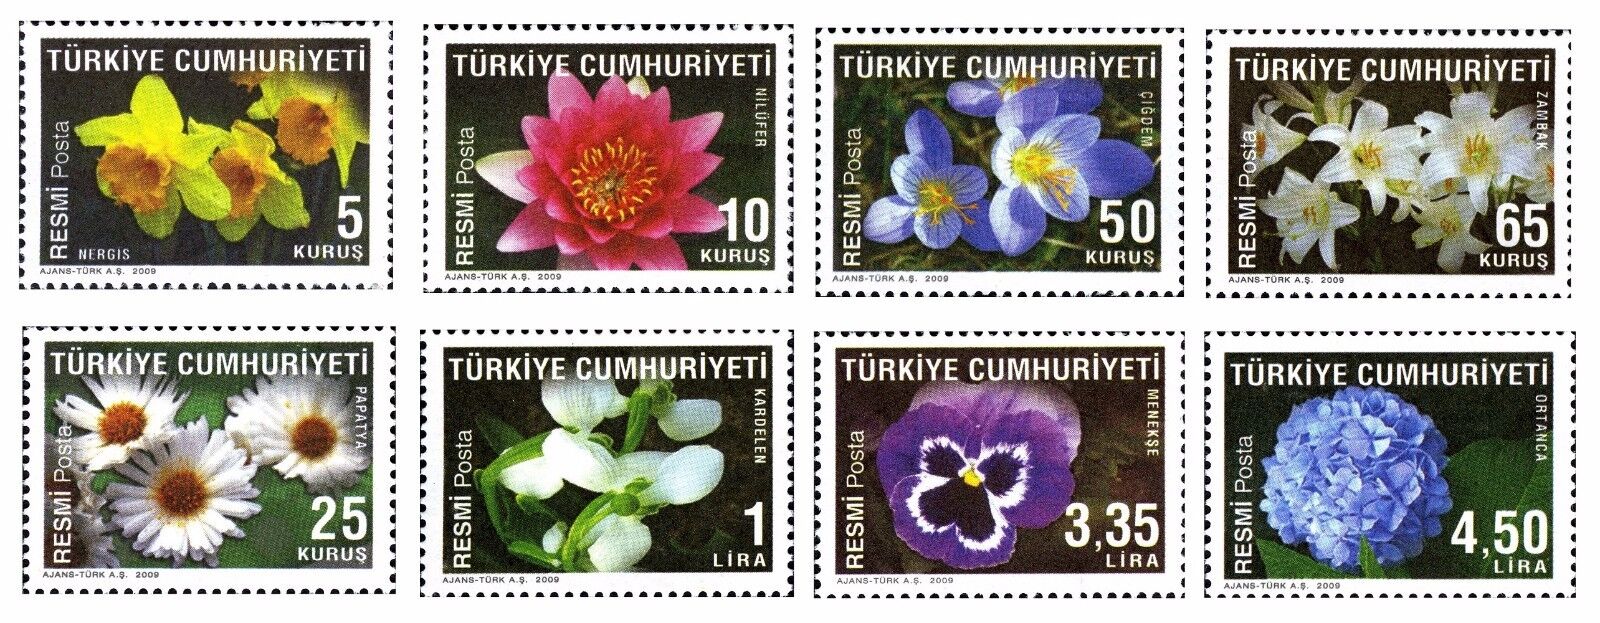 TURKEY 2009 OFFICIAL STAMPS WITH THEME OF Sales of SALE items from Challenge the lowest price new works 1 FLOWERS MNH -